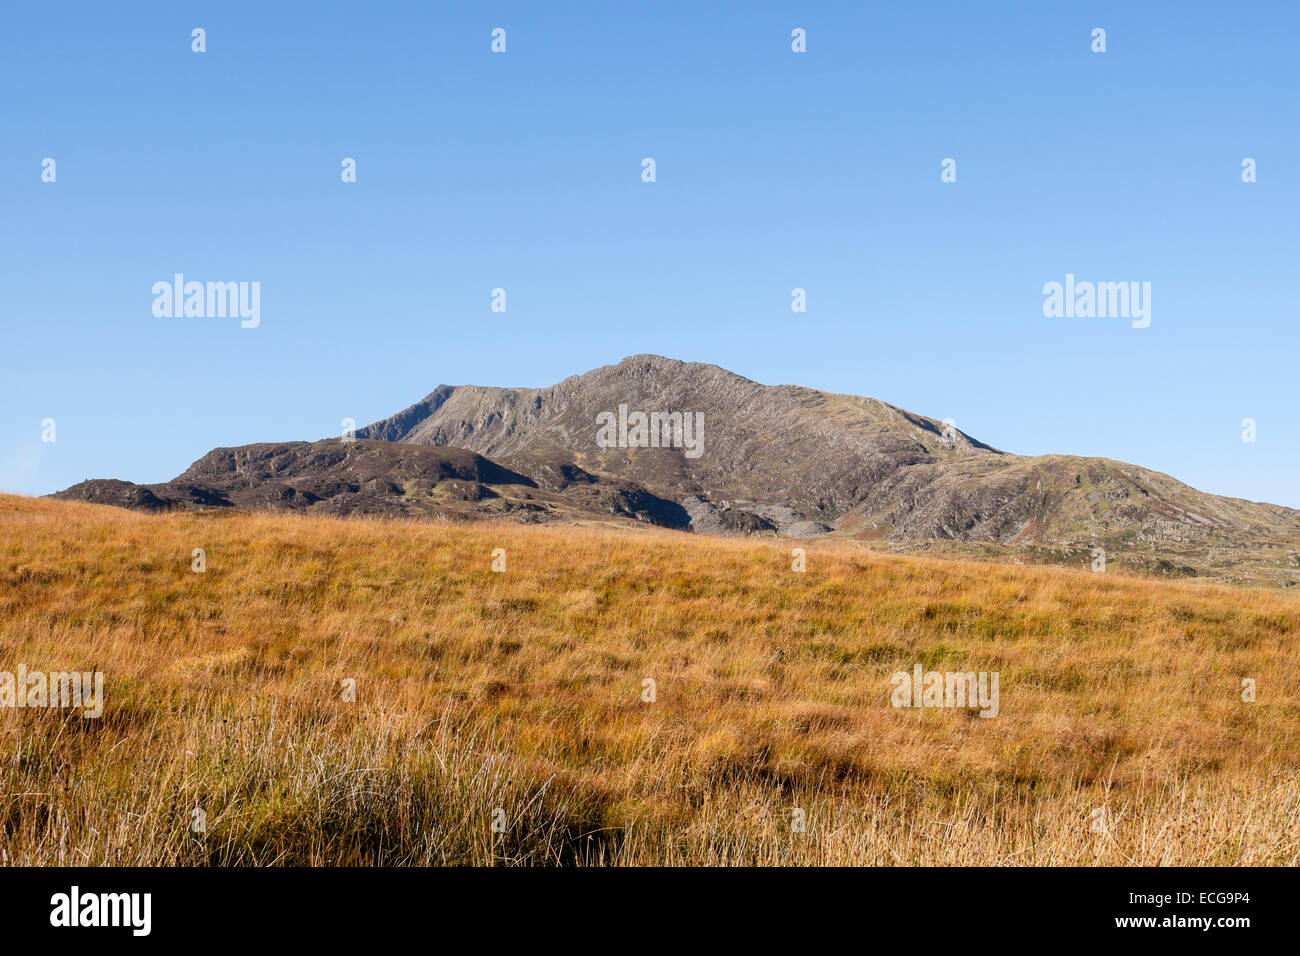 View across moorland to rocky Carnedd Moel Siabod mountain from east side in Snowdonia National Park, North Wales, UK, Britain Stock Photo